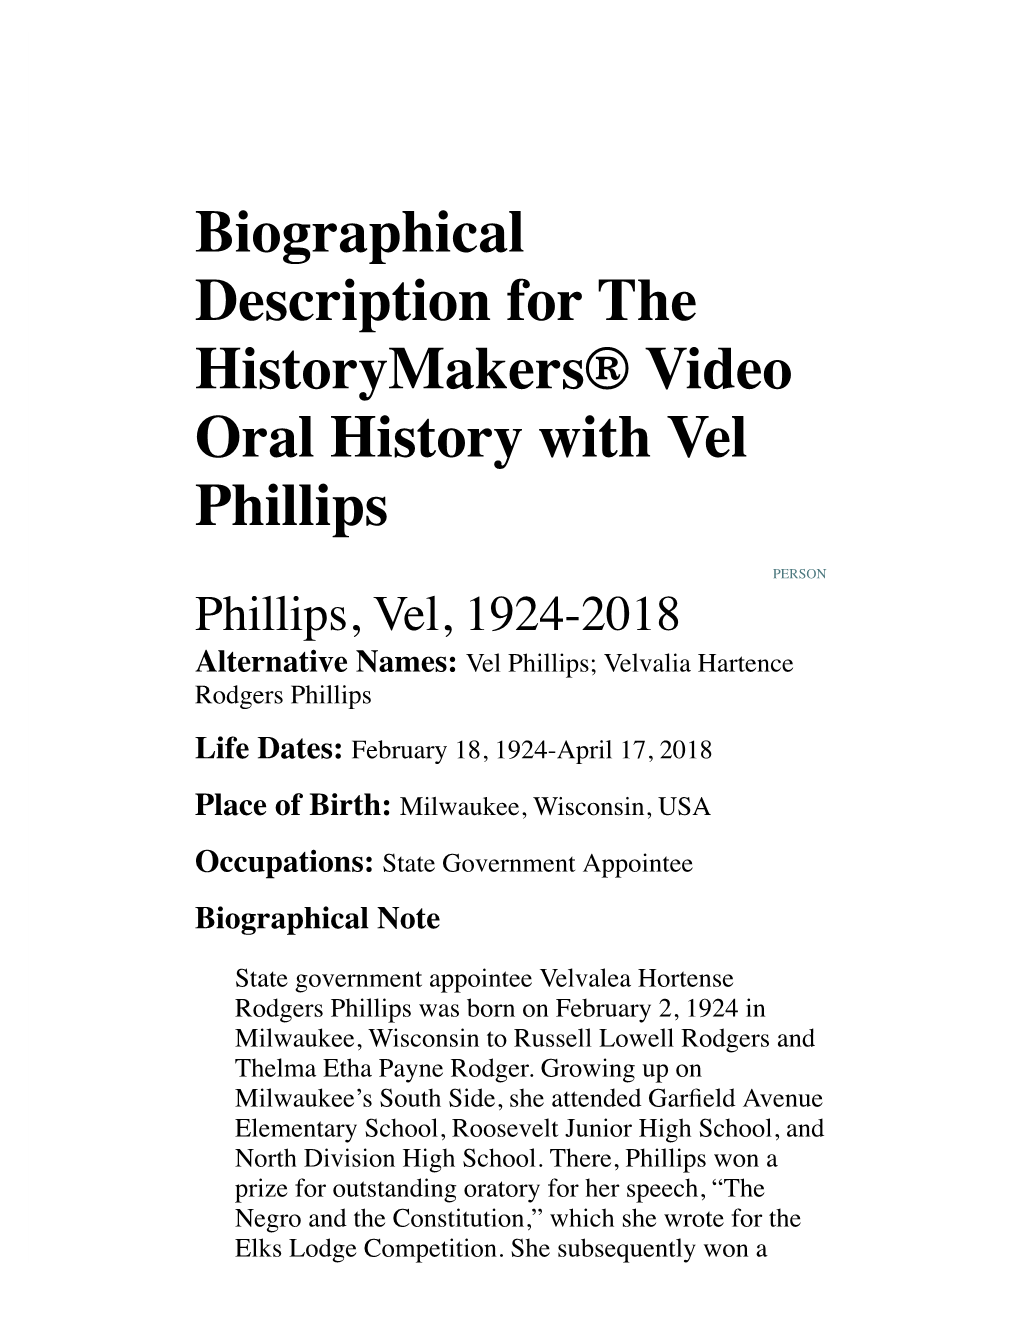 Biographical Description for the Historymakers® Video Oral History with Vel Phillips